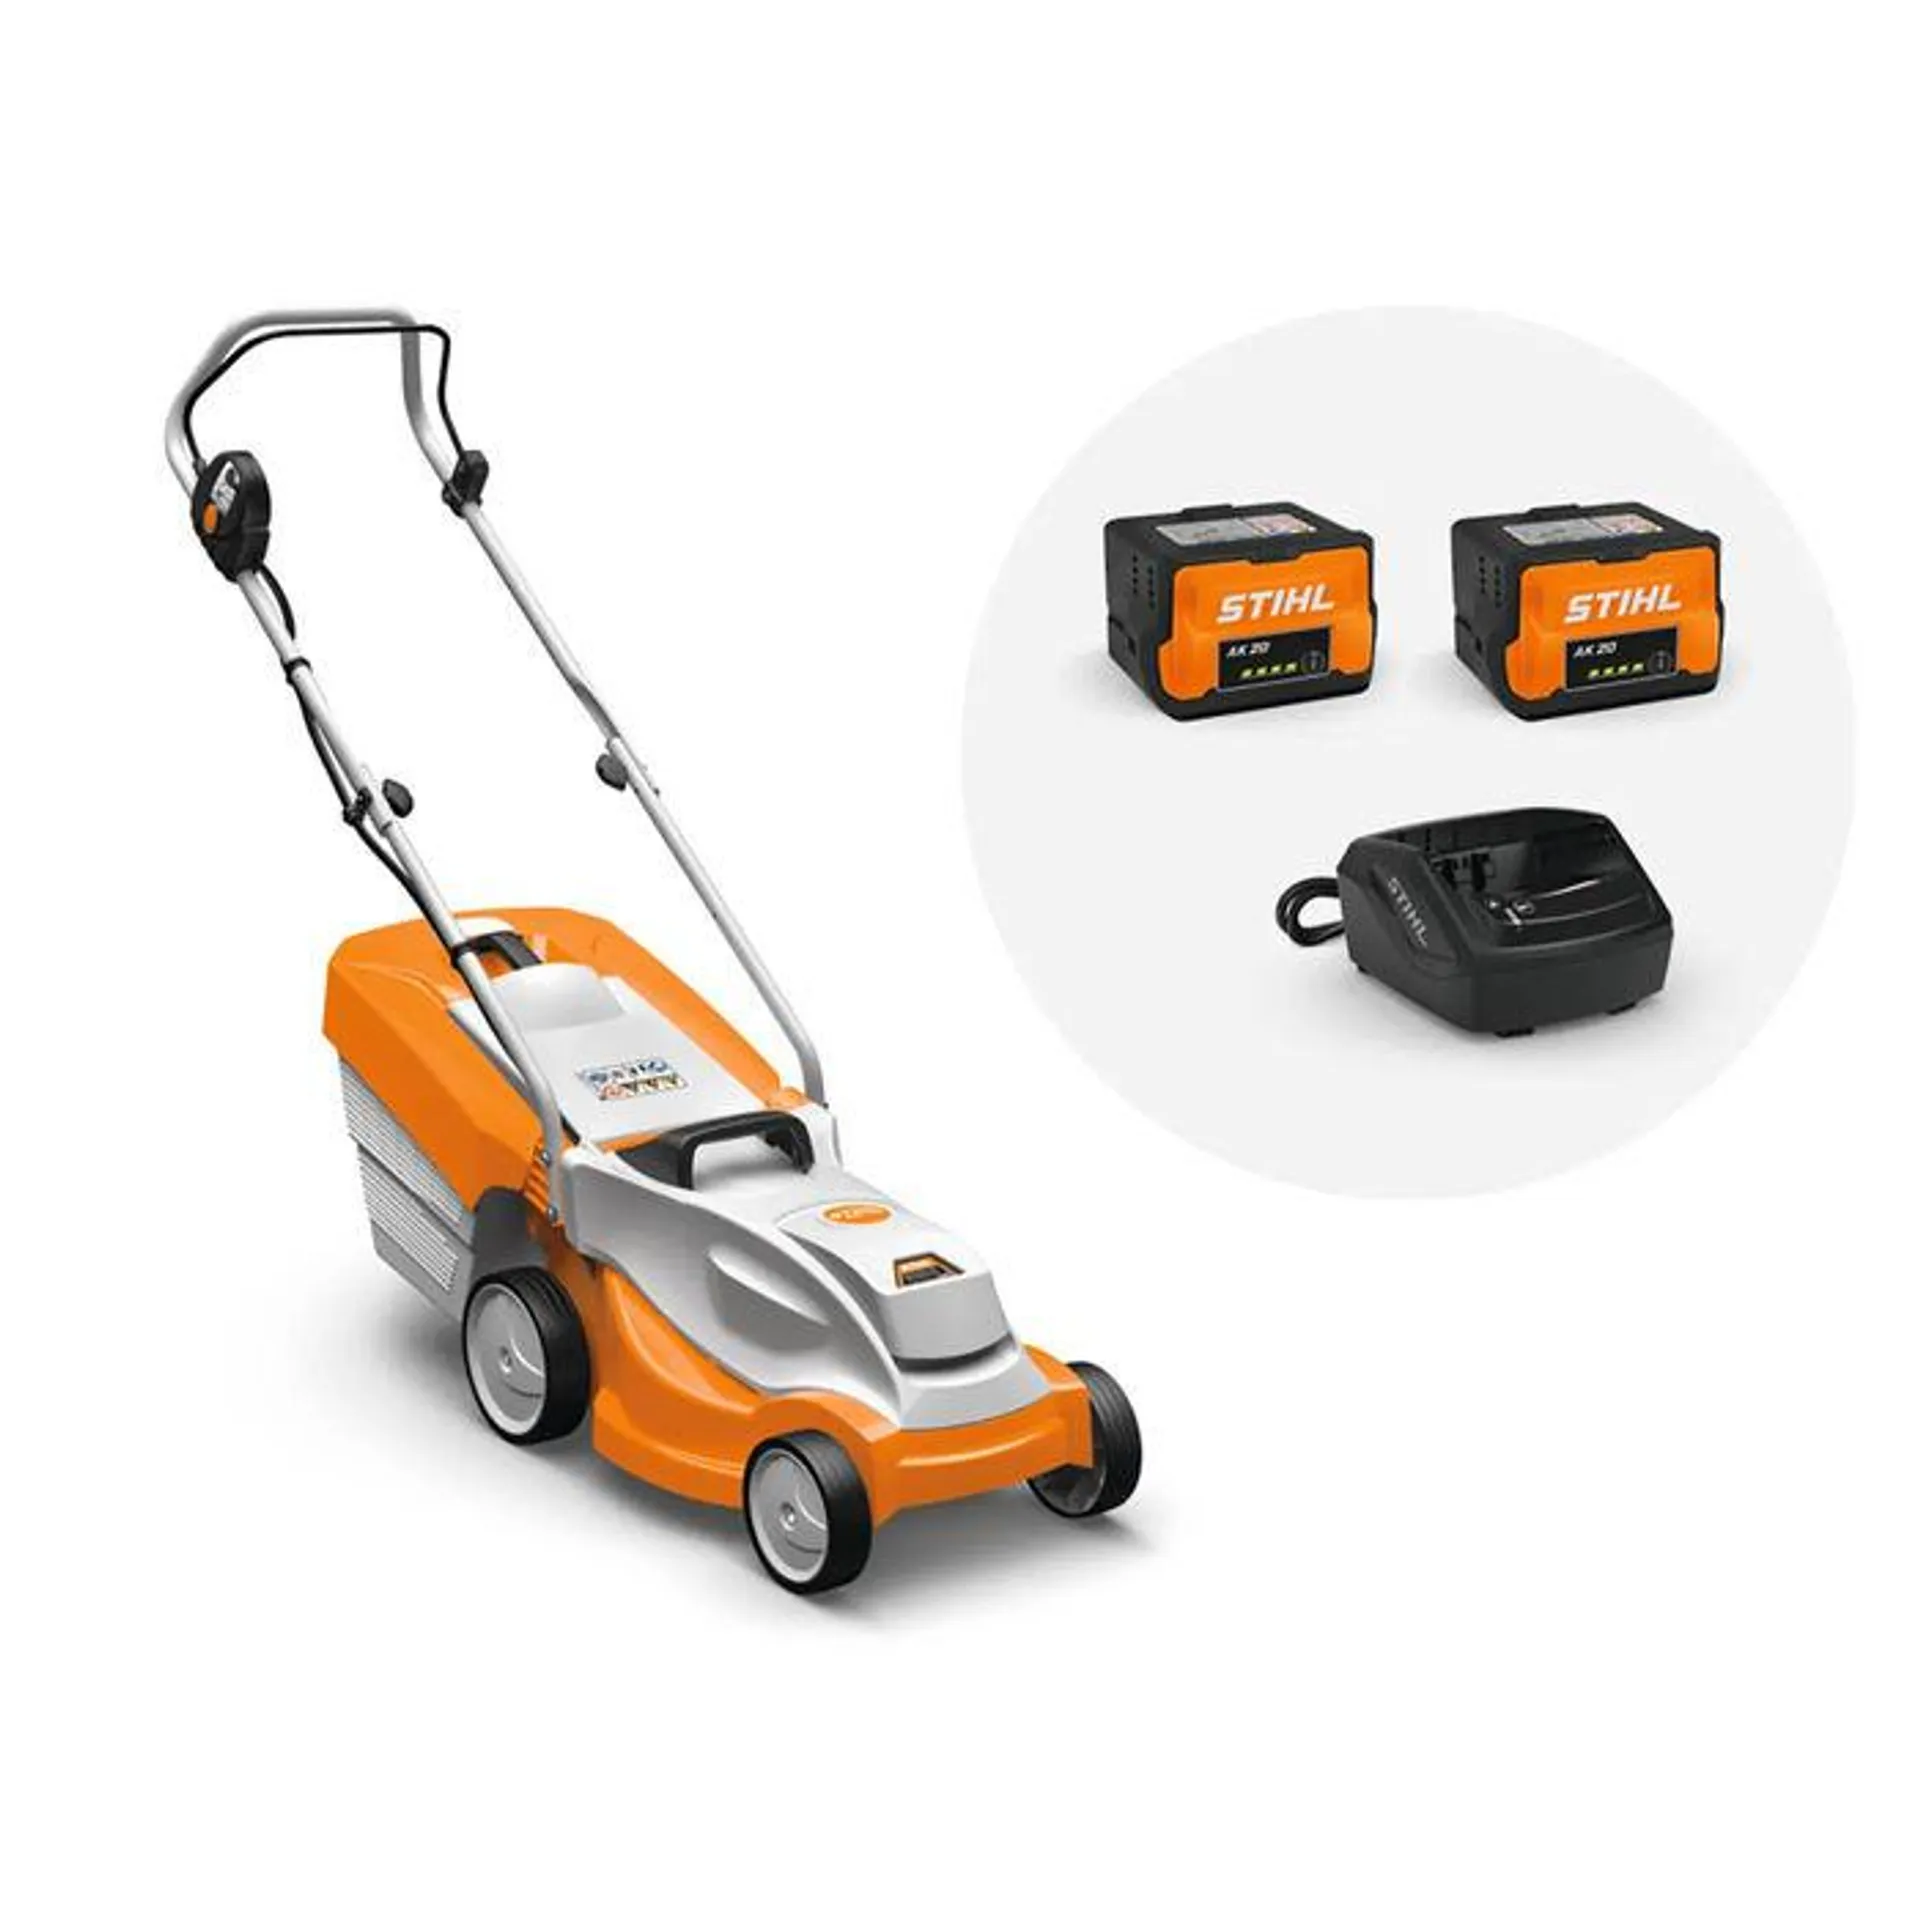 STIHL RMA 235 Battery Lawnmower Kit with free second battery